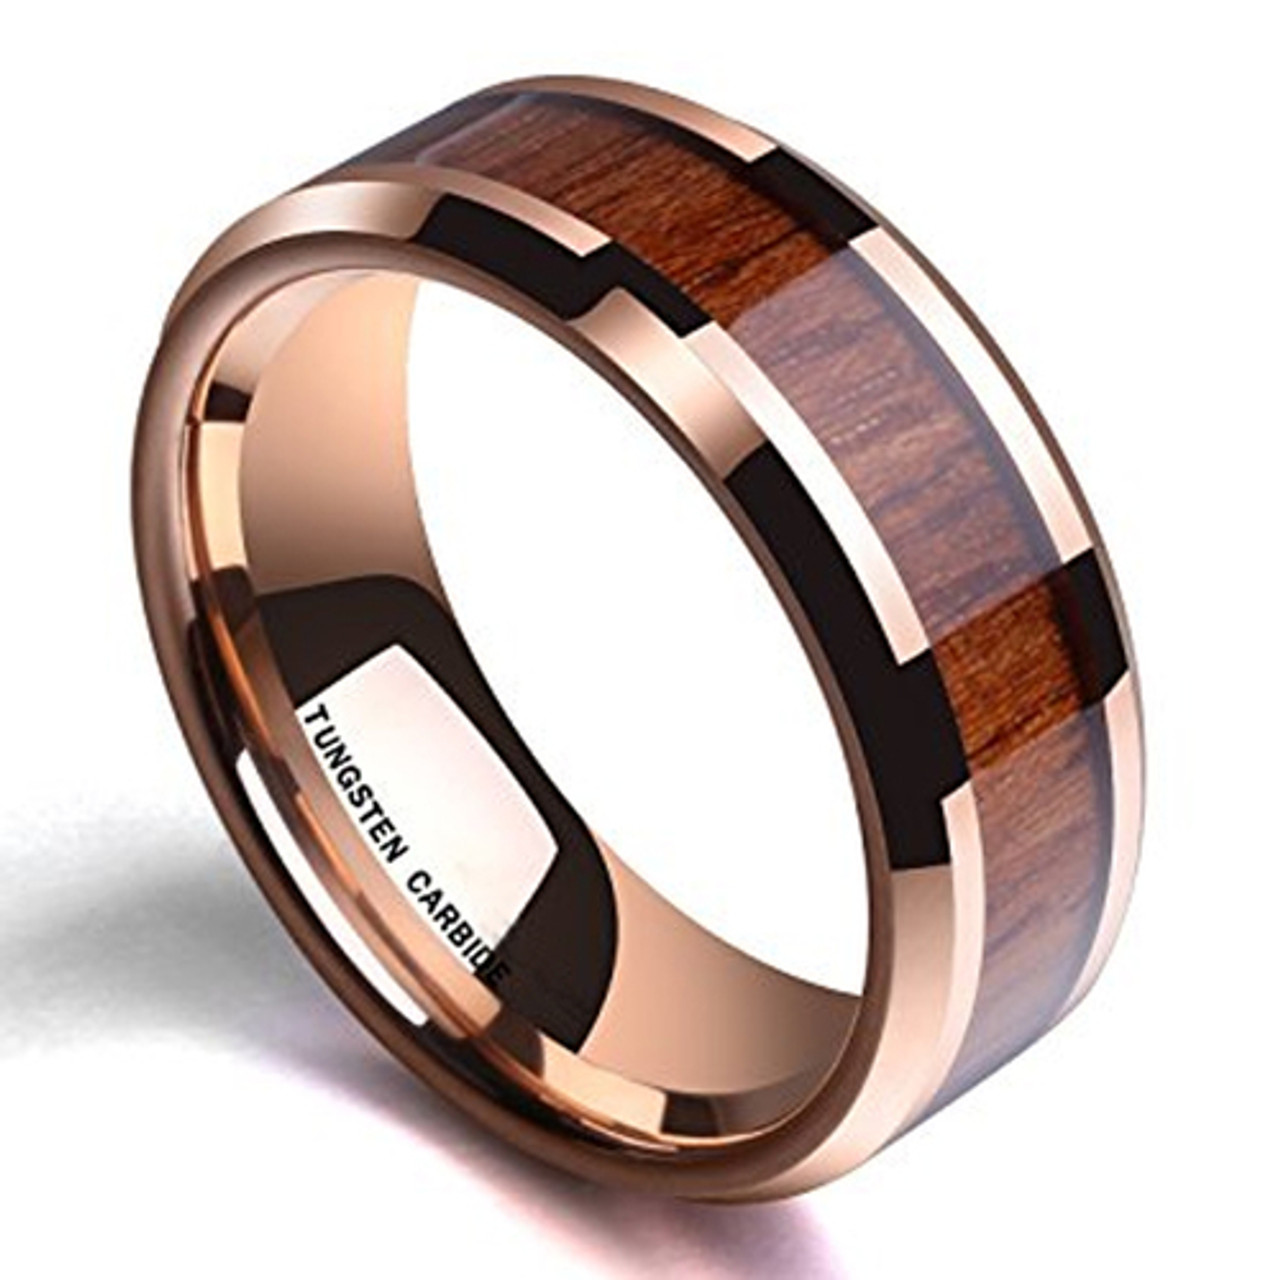 (8mm) Unisex or Men's Wood Inlay and Rose Gold Tone Tungsten Carbide Wedding Ring Band with High Polish and Beveled Edges.